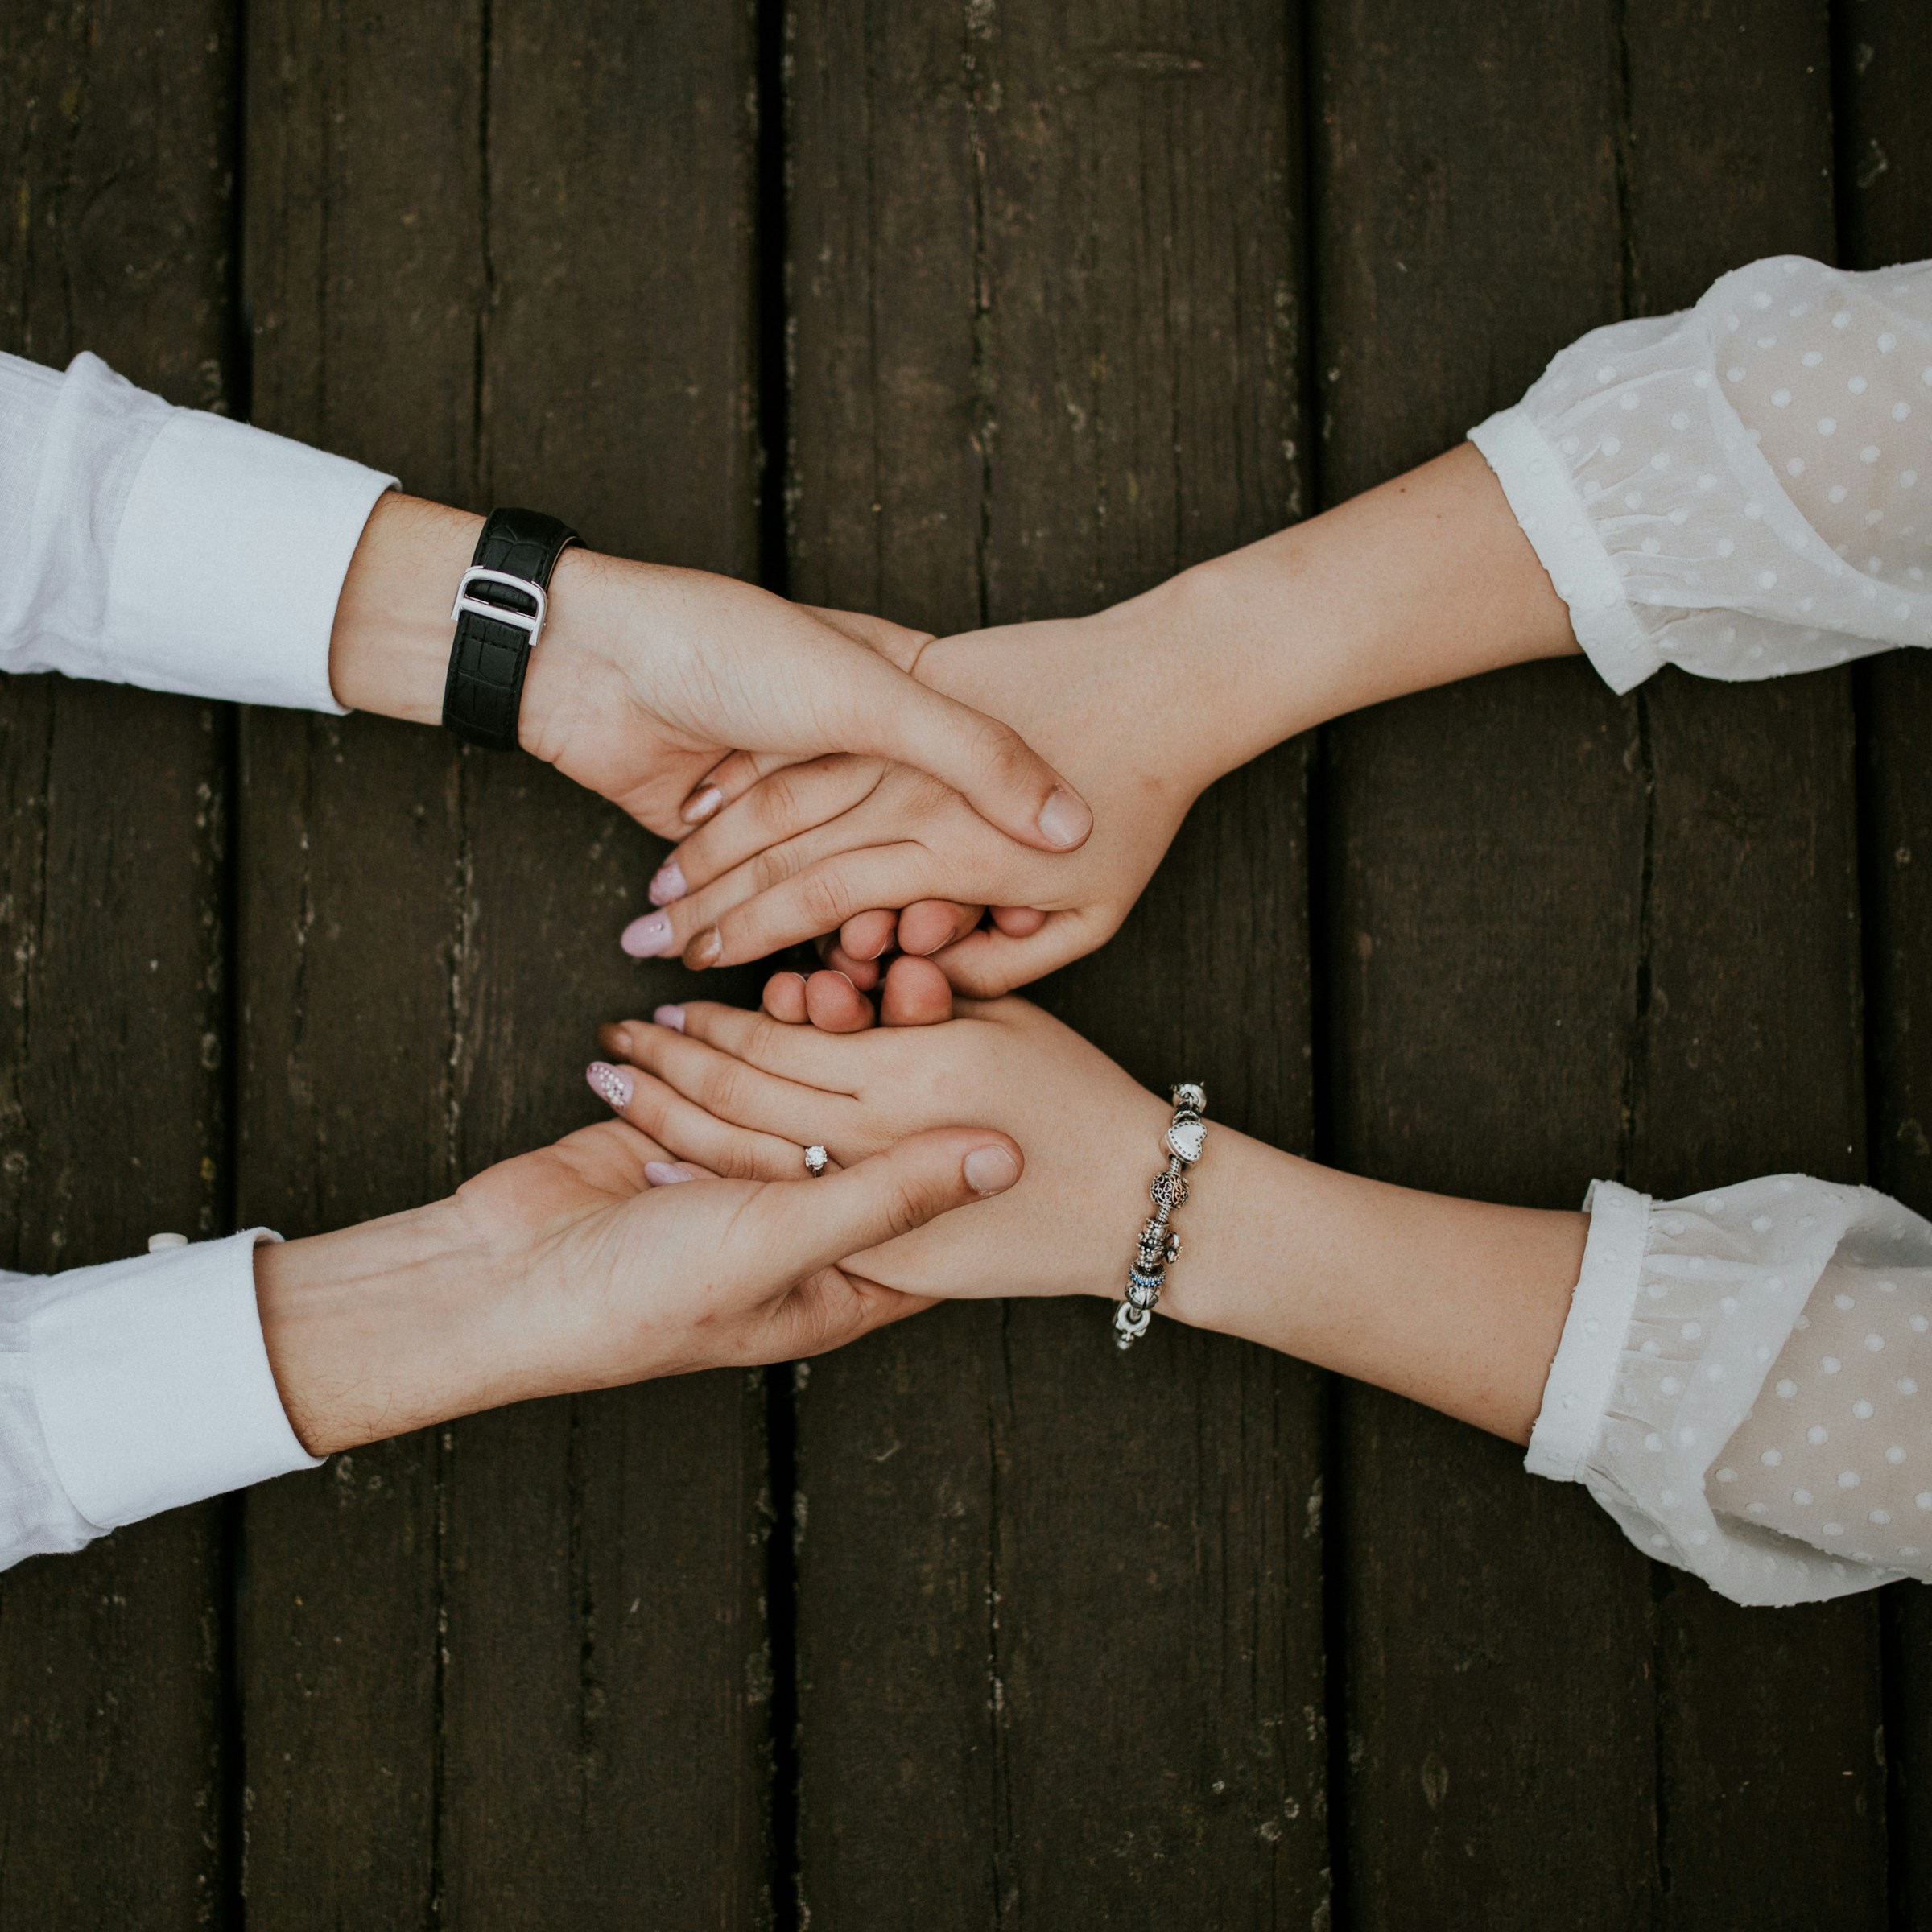 Holding hands across a table | Source: Unsplash